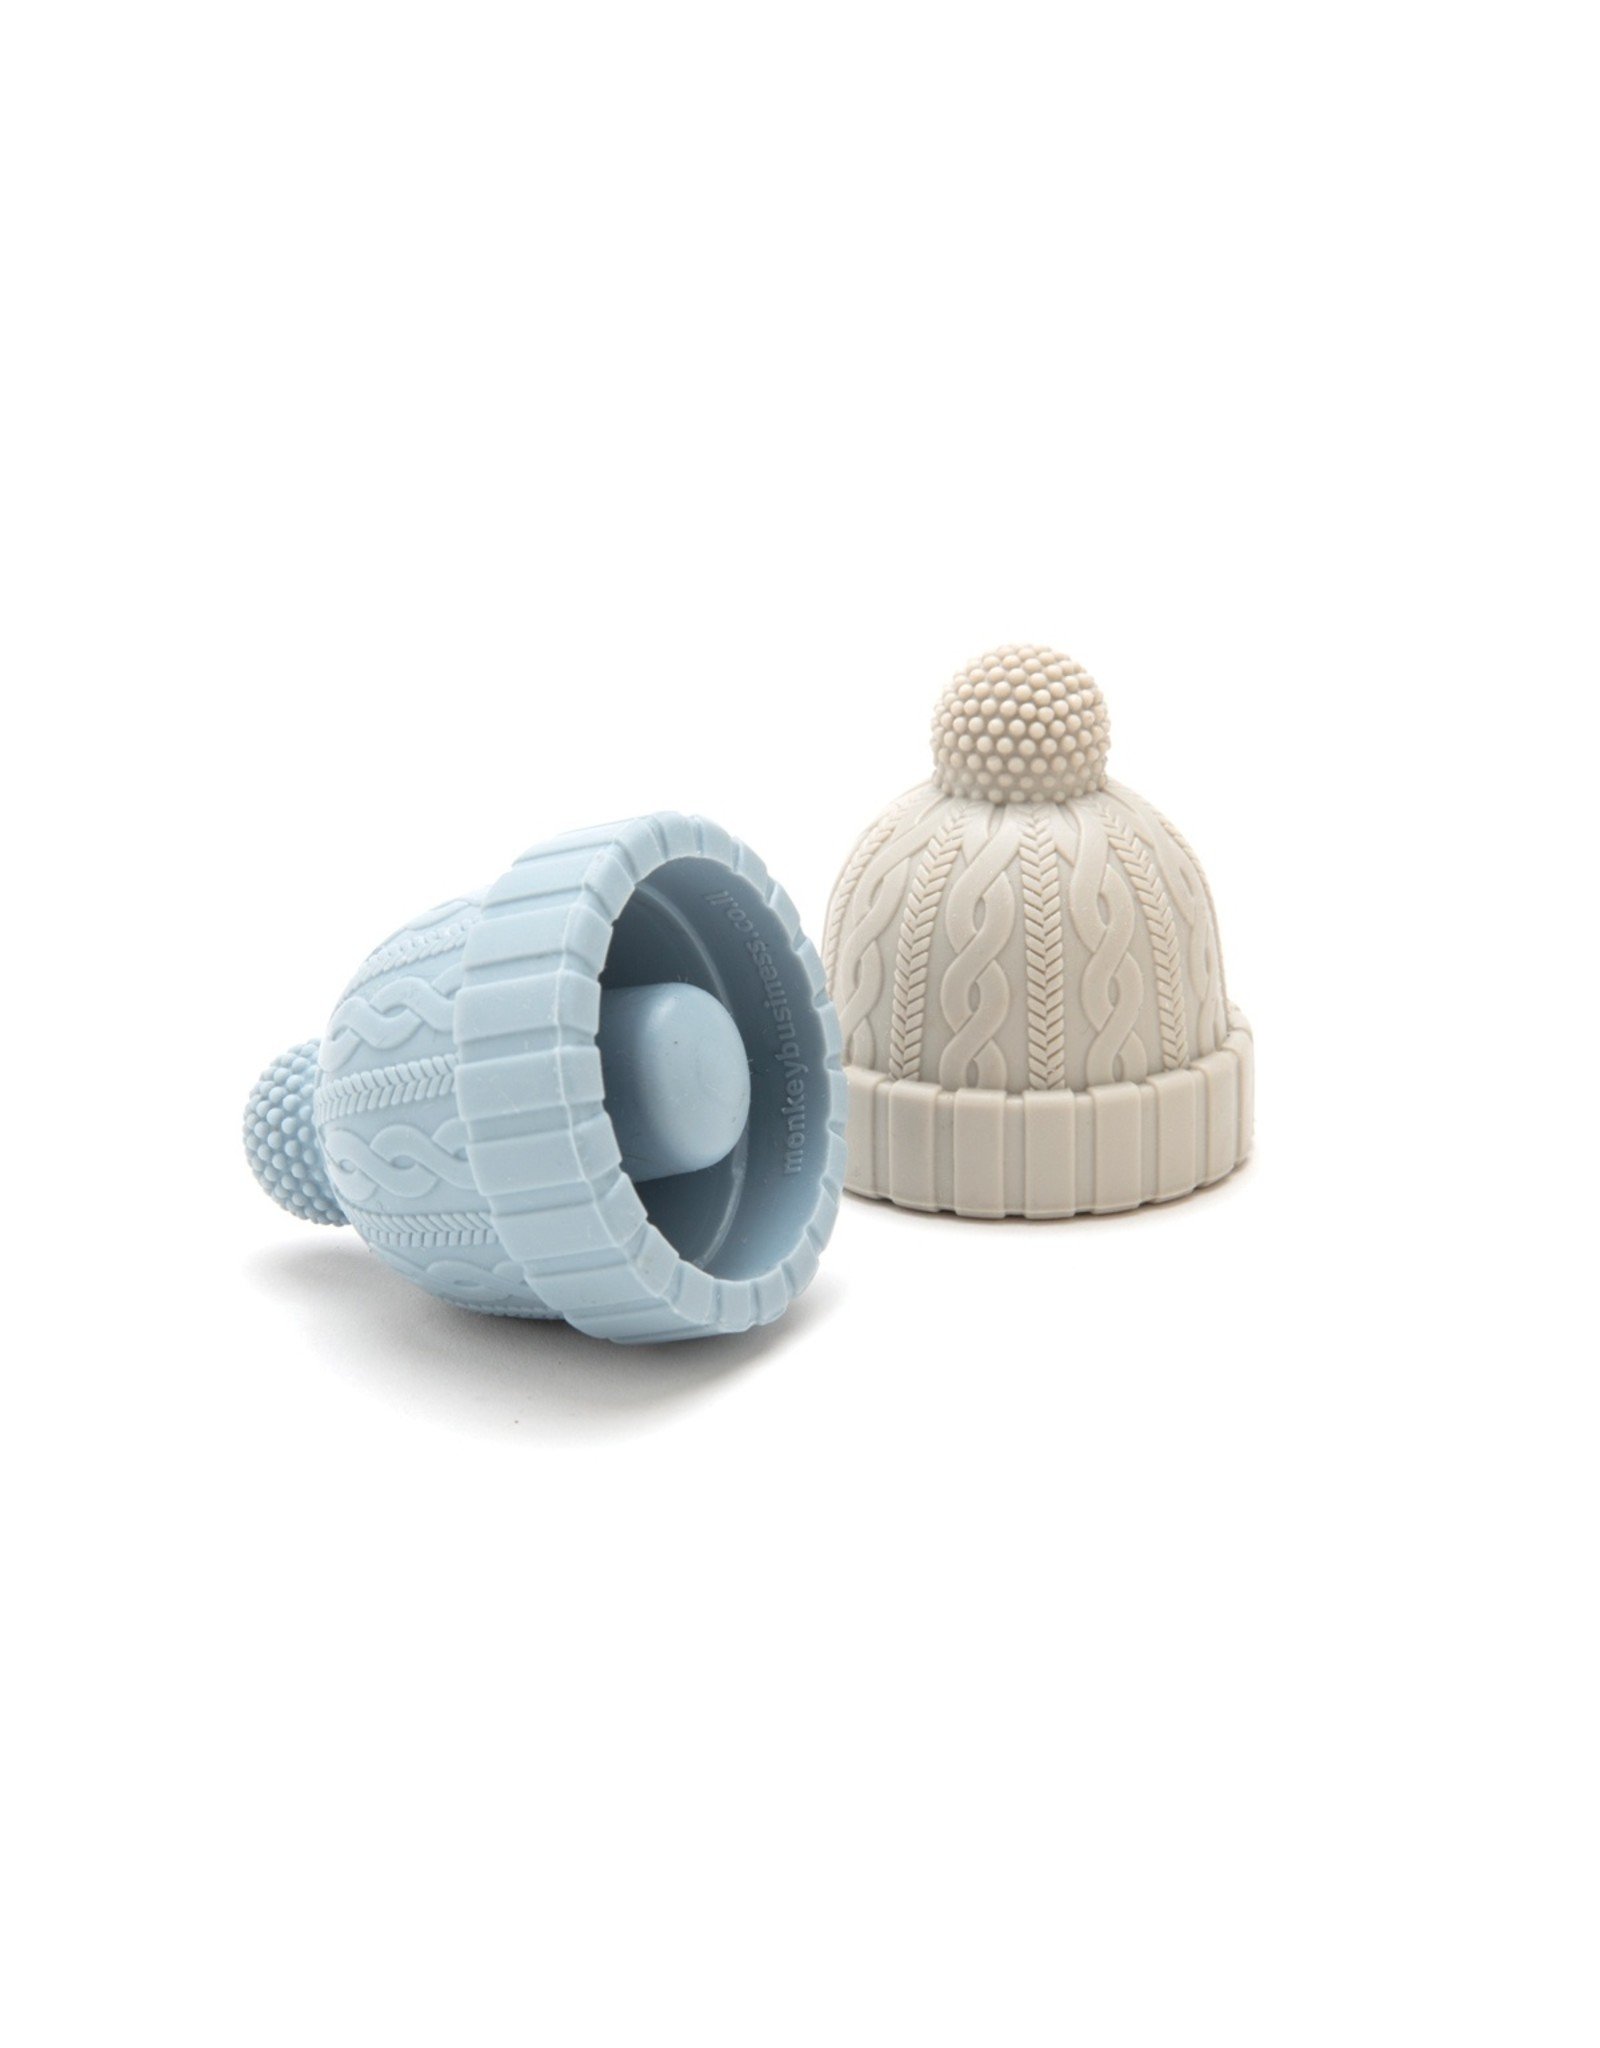 Blue and Grey Beanie Hat Bottle Stopper